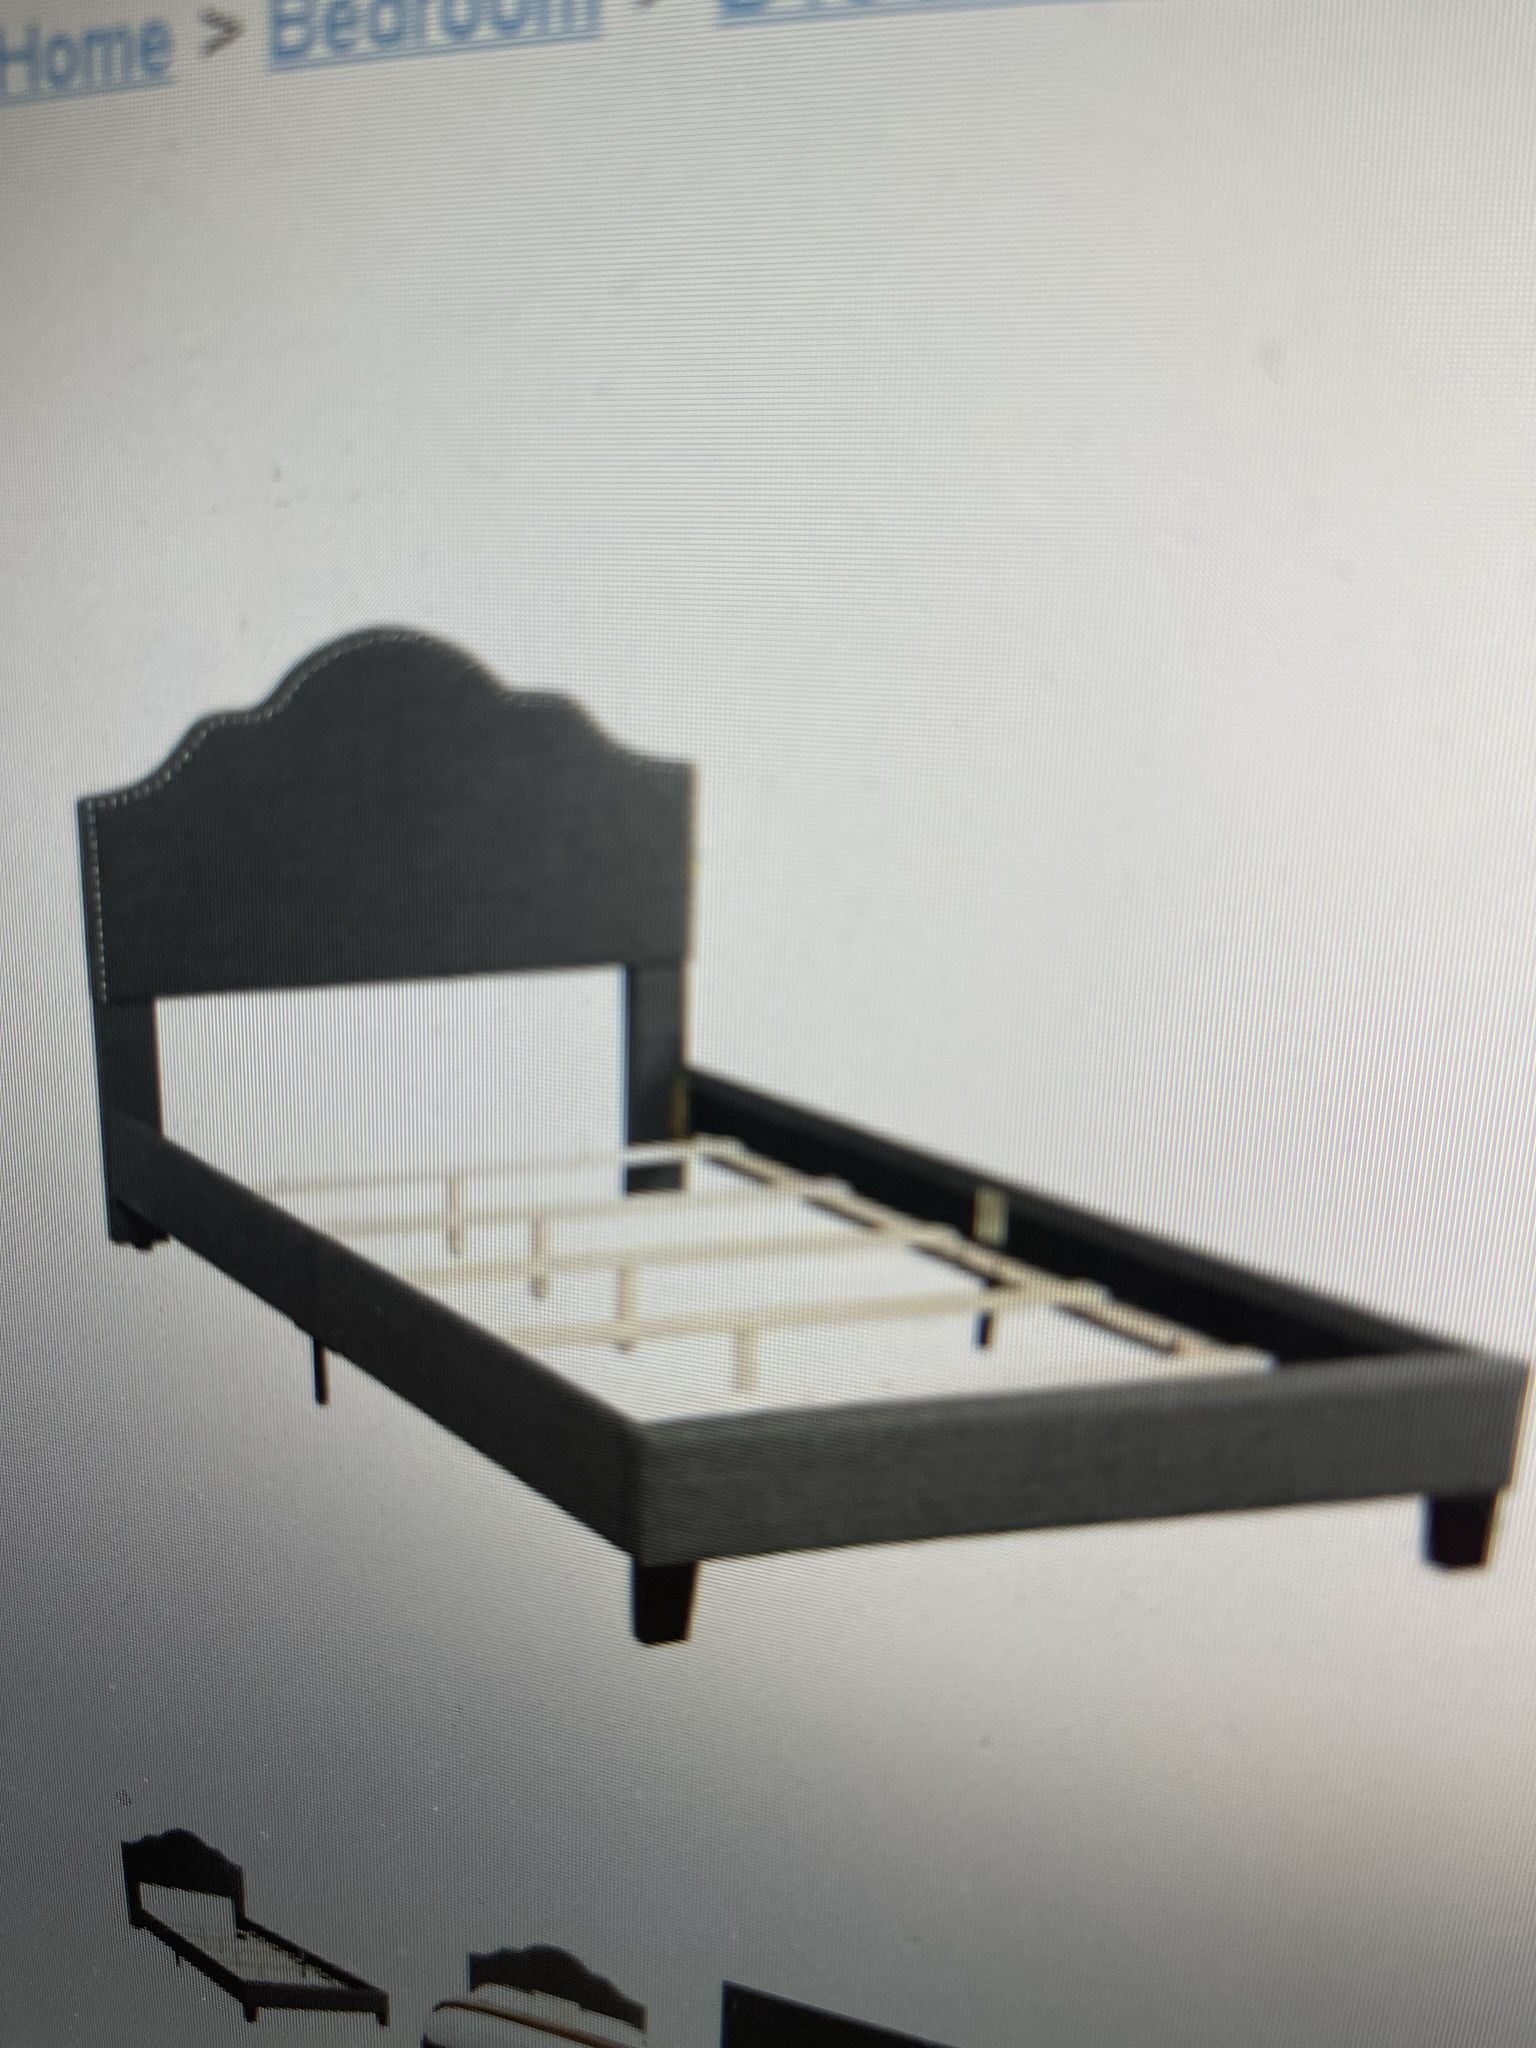 Queen Bed Frame On Sale